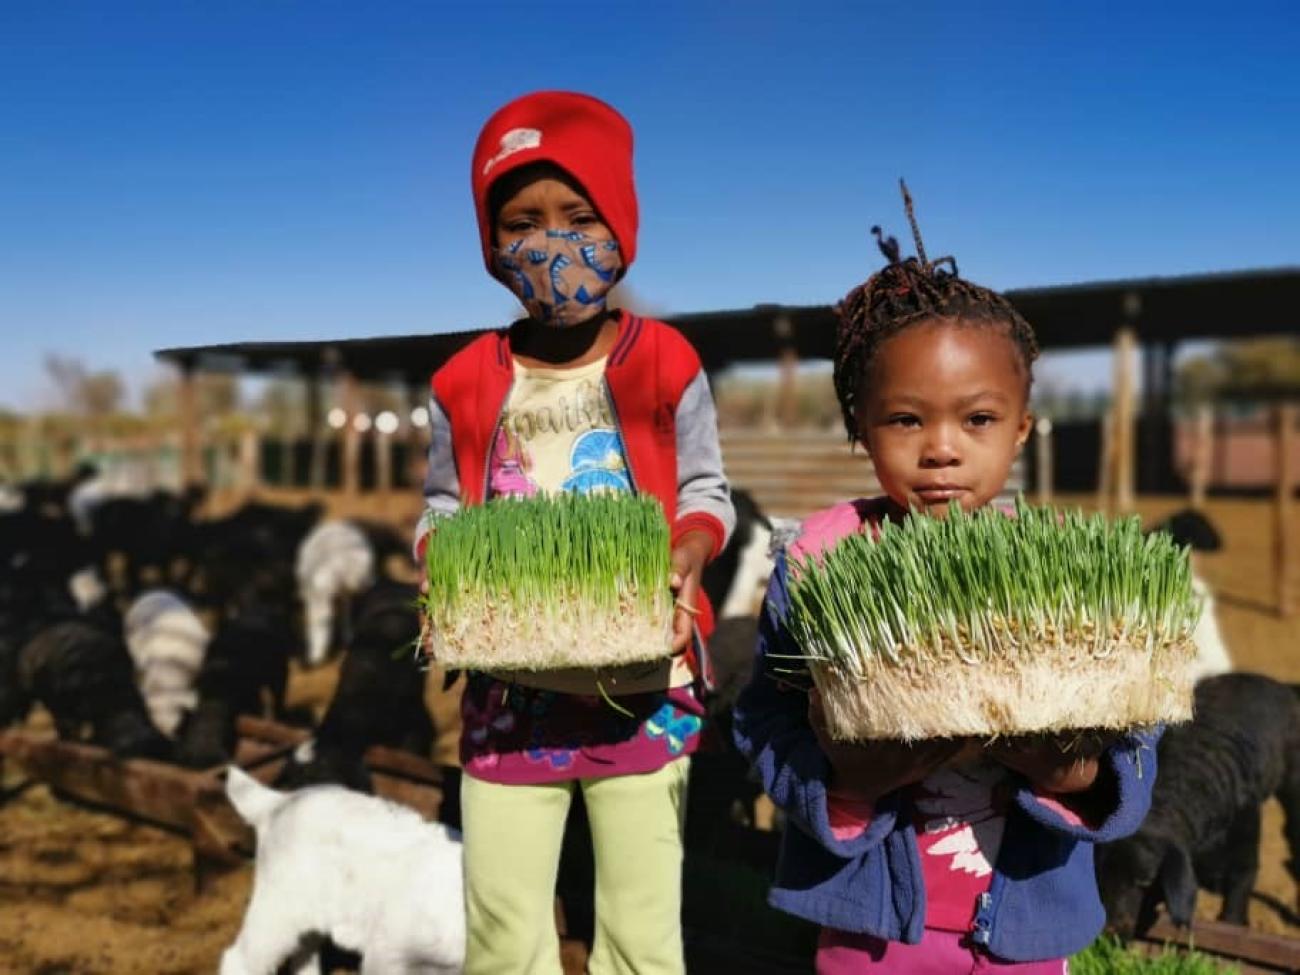 Children holding fresh fodder dervived from a structure located in Amalia, a small village south of Namibia